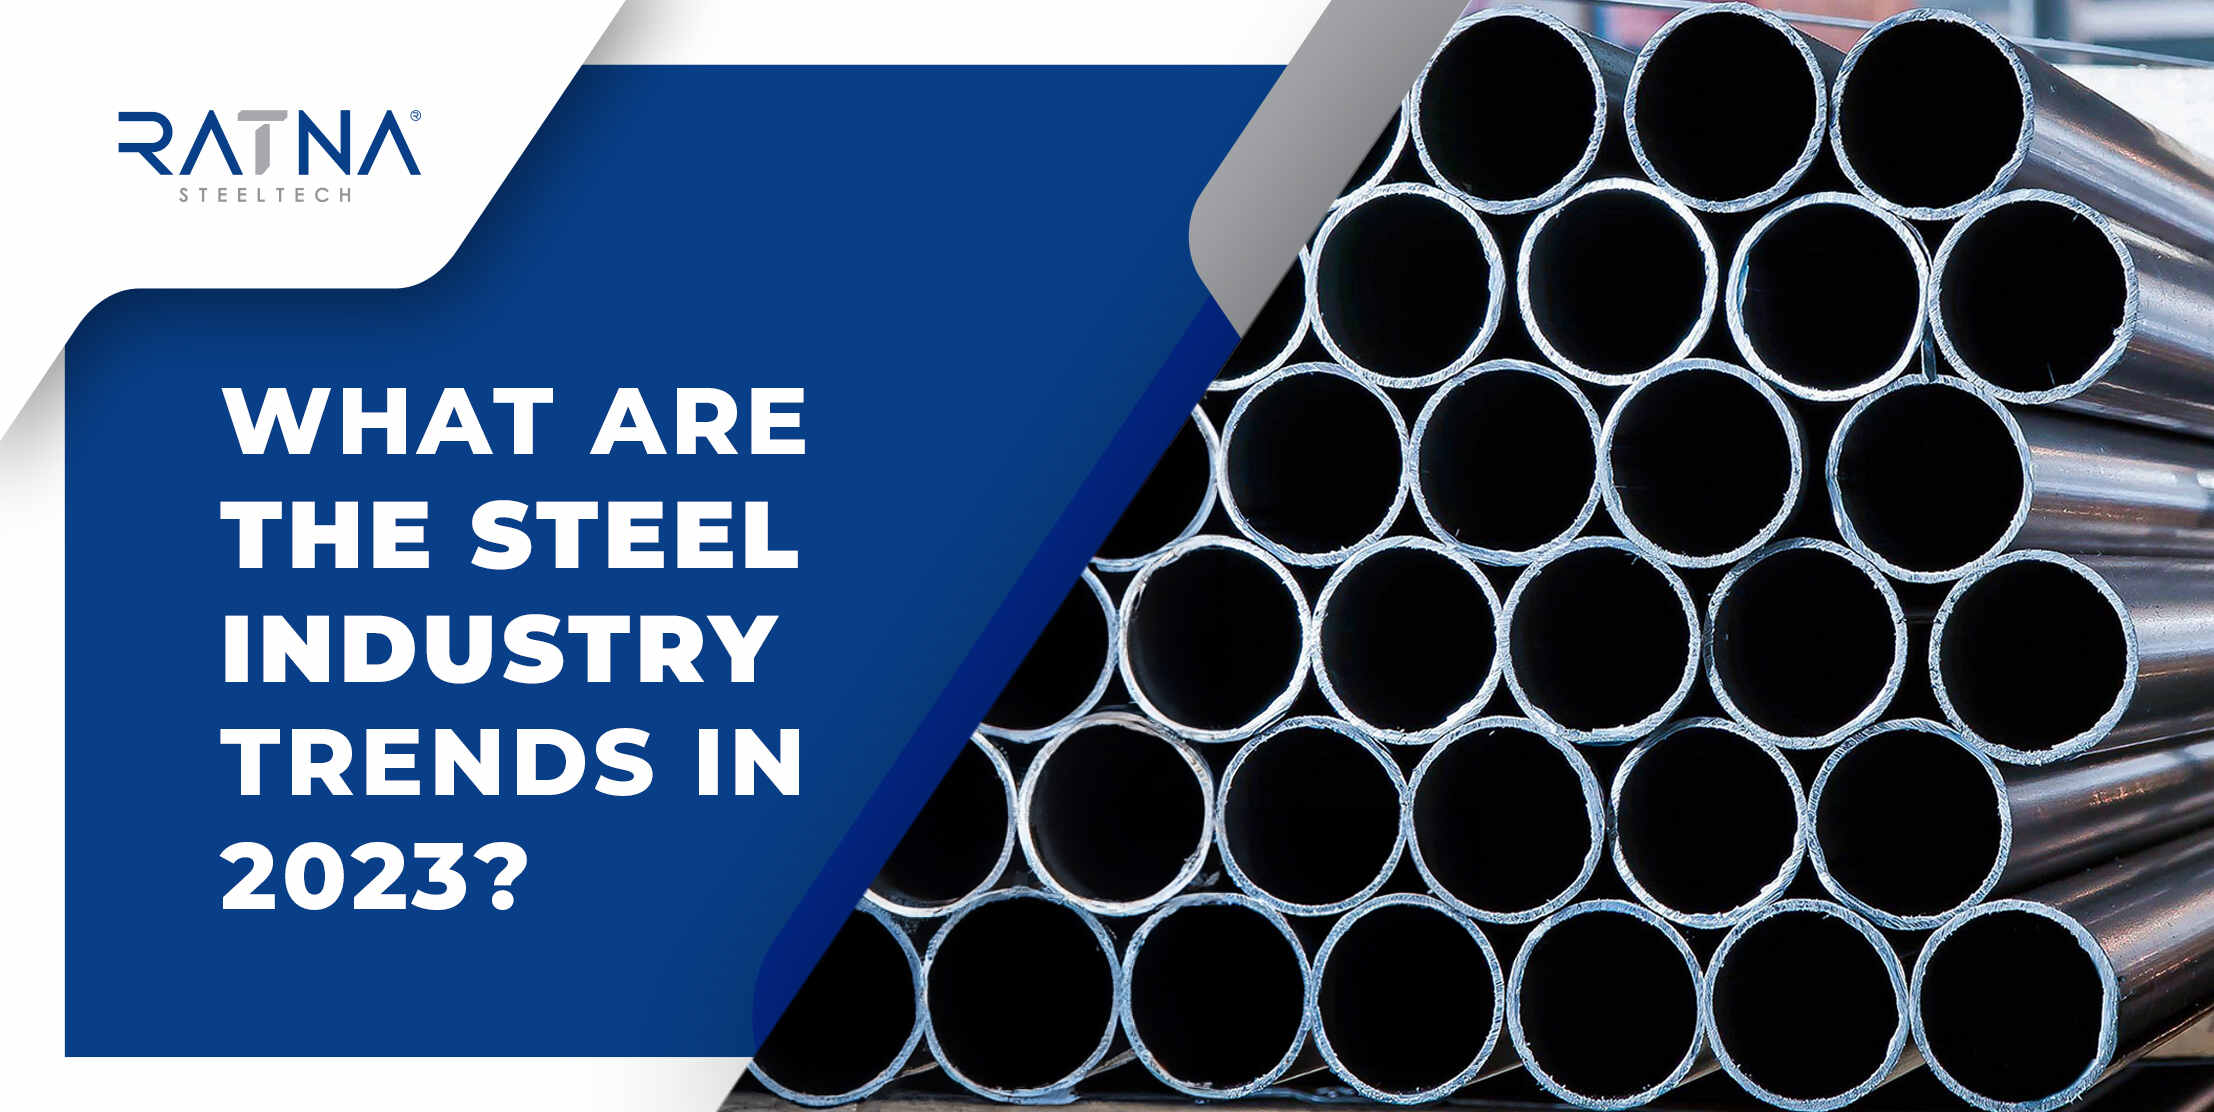 What are the Steel industry trends in 2023